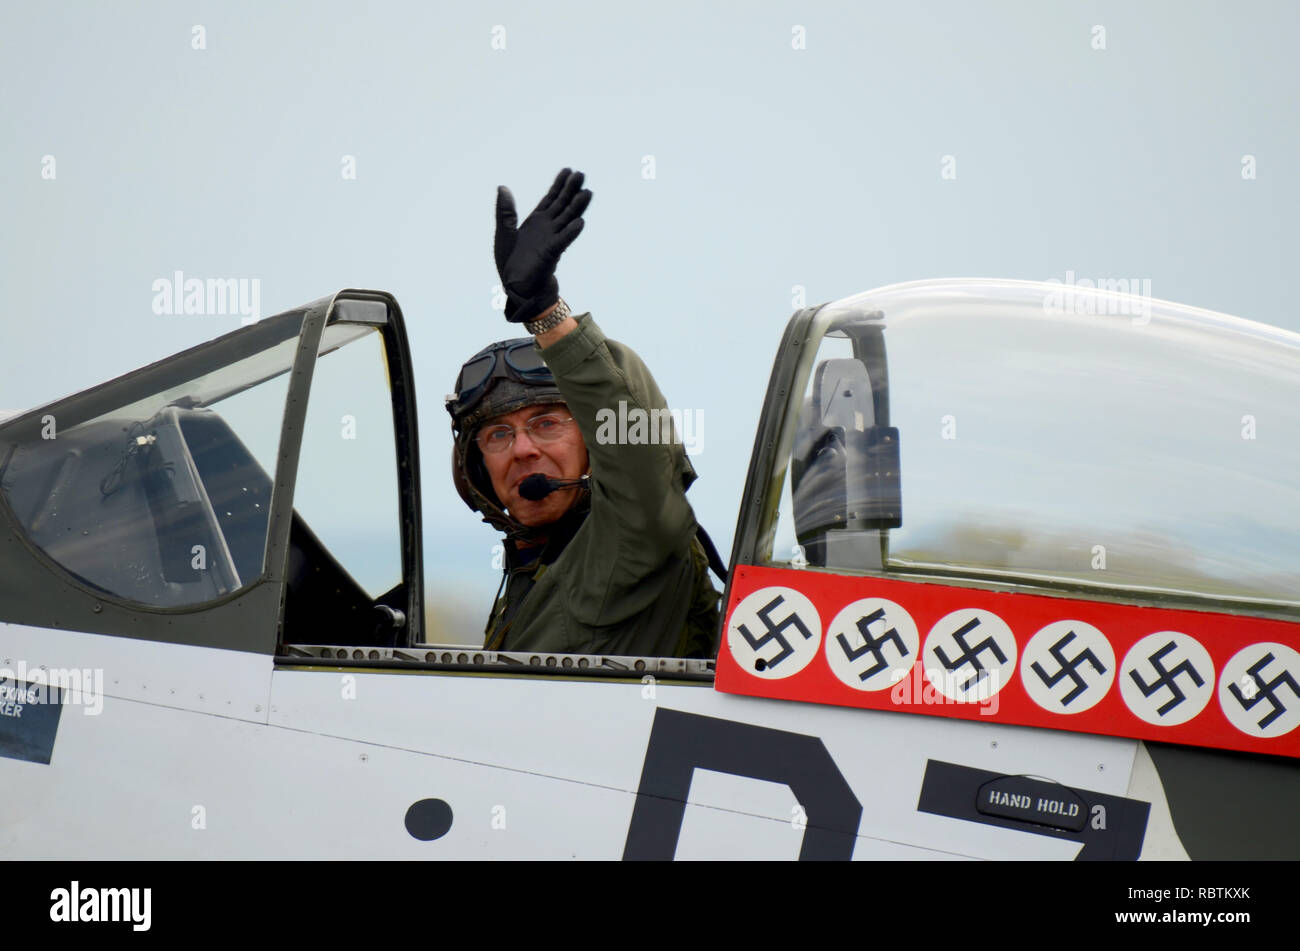 Pilot Alister Kay in cockpit of P-51 Mustang Second World War fighter plane with swastika 'kill markings' Stock Photo